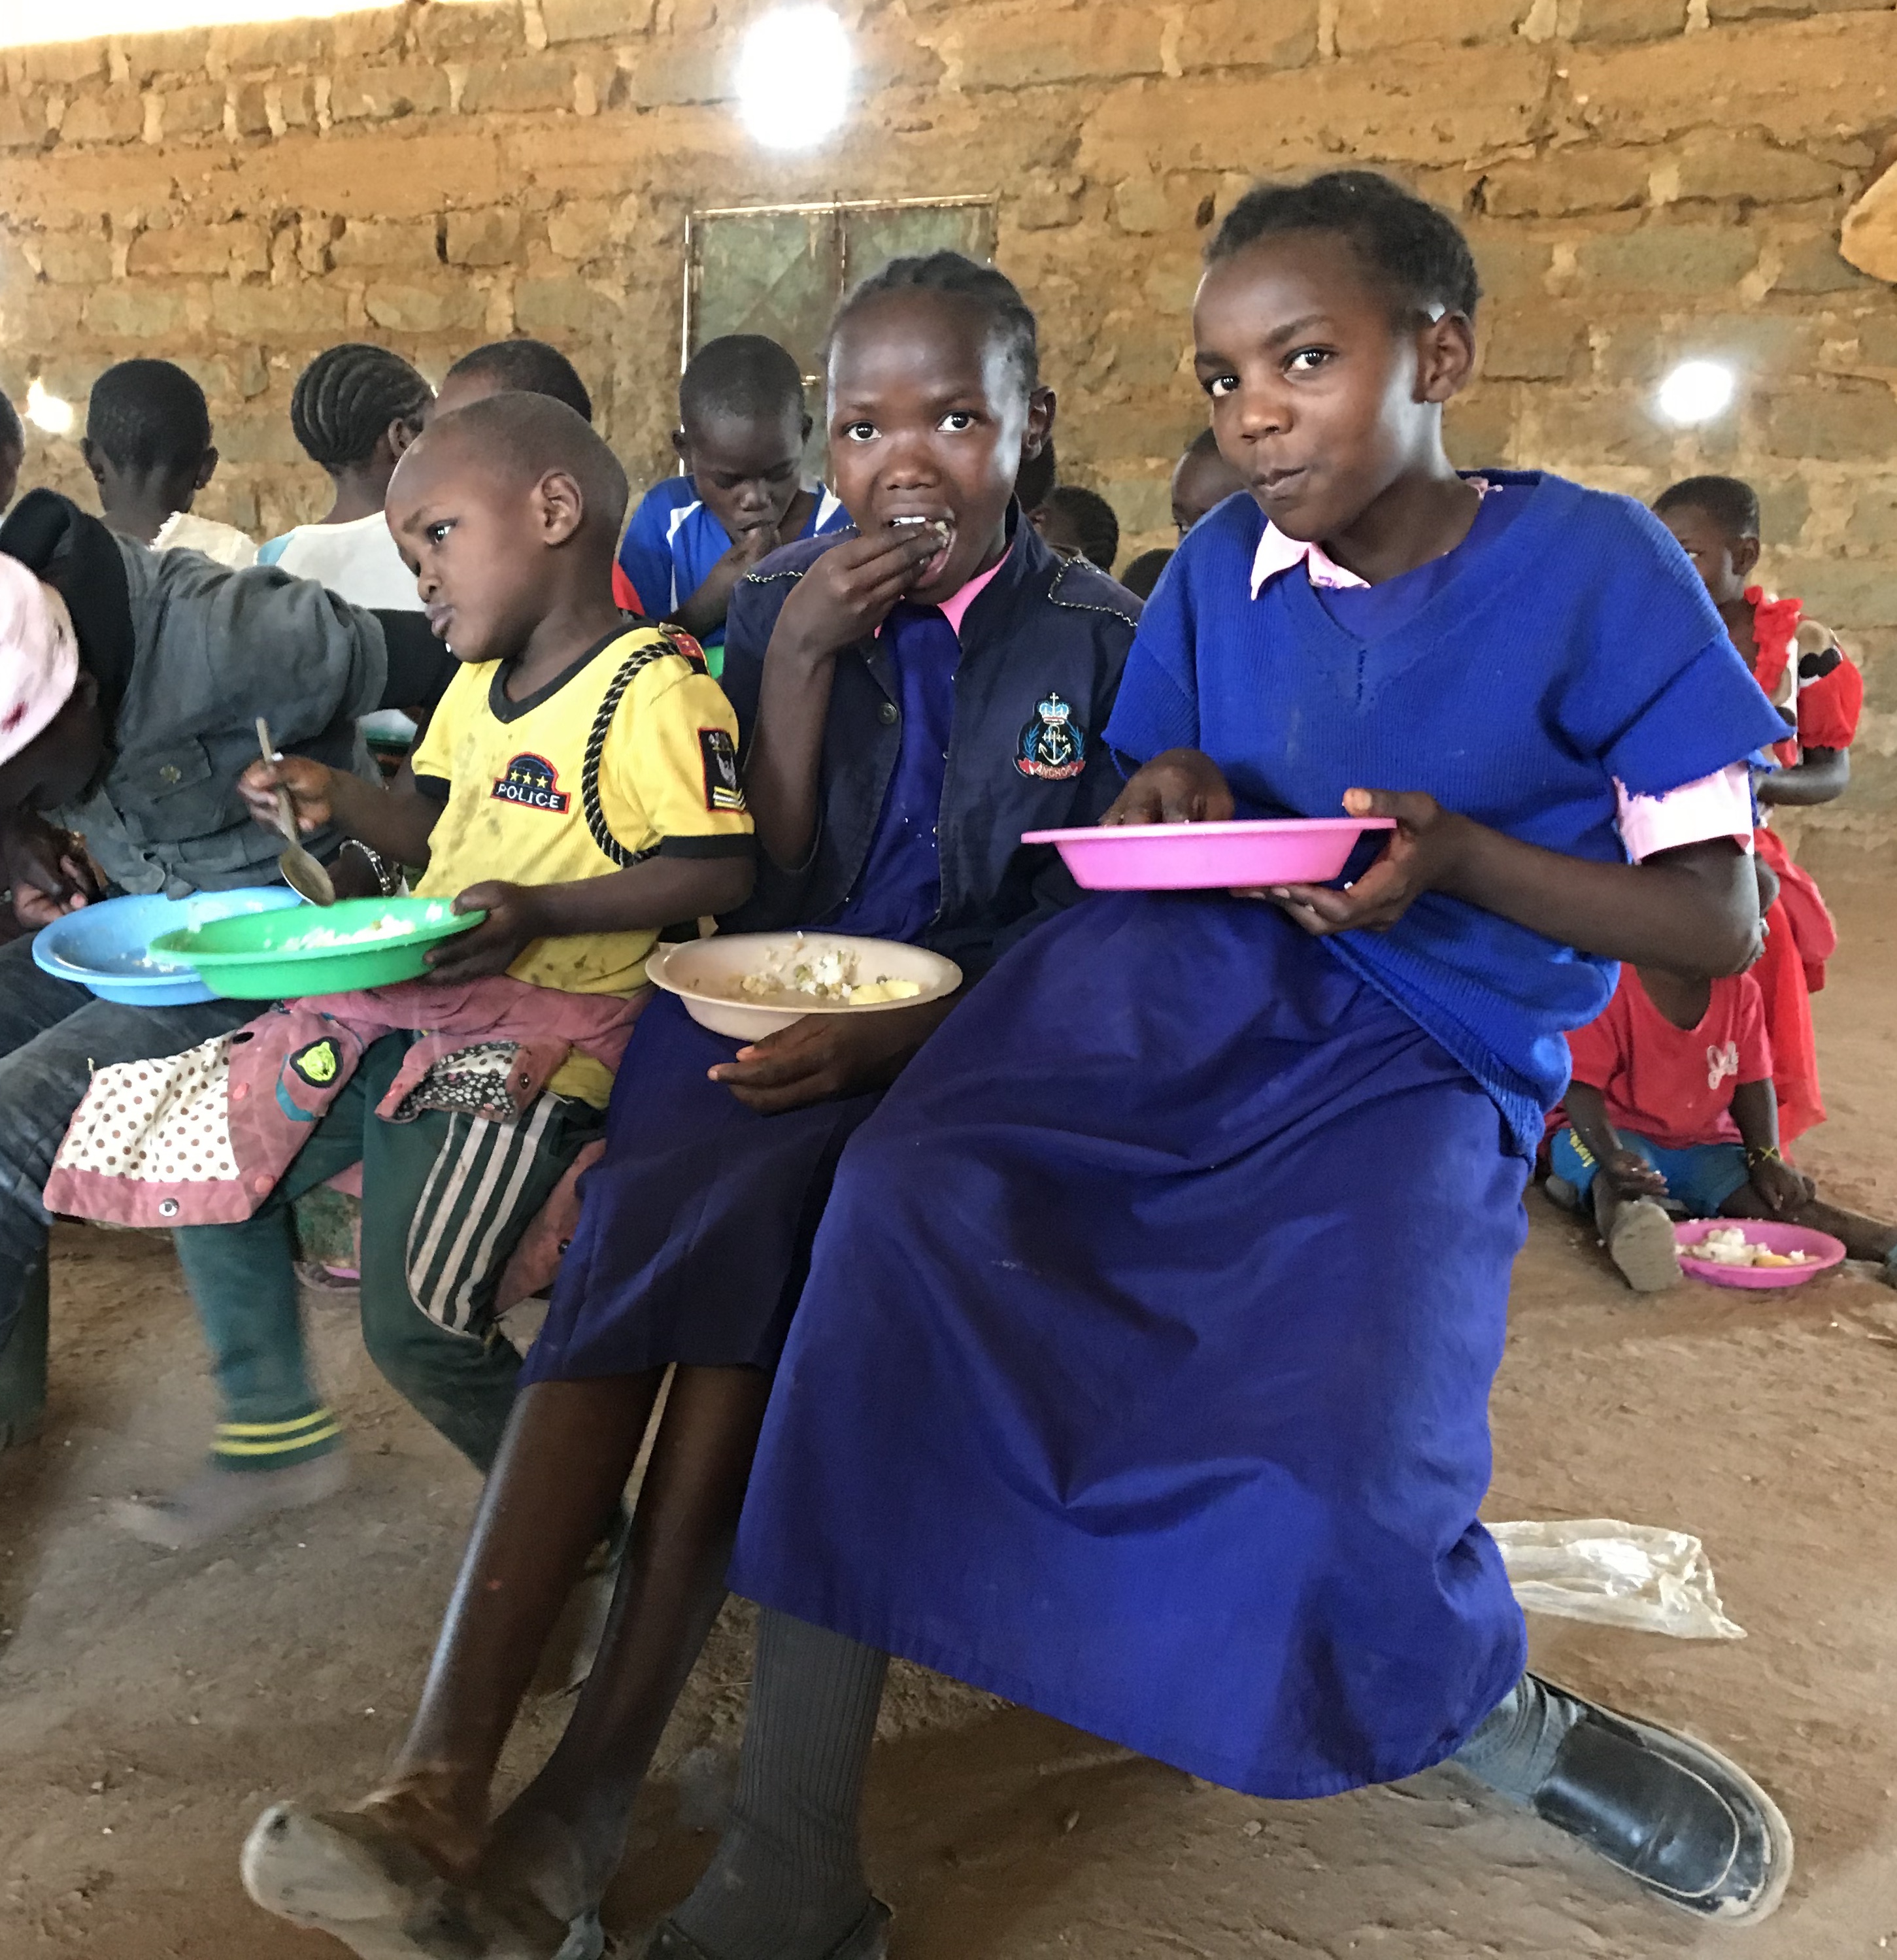 students at Thika school eating their lunchtime meal